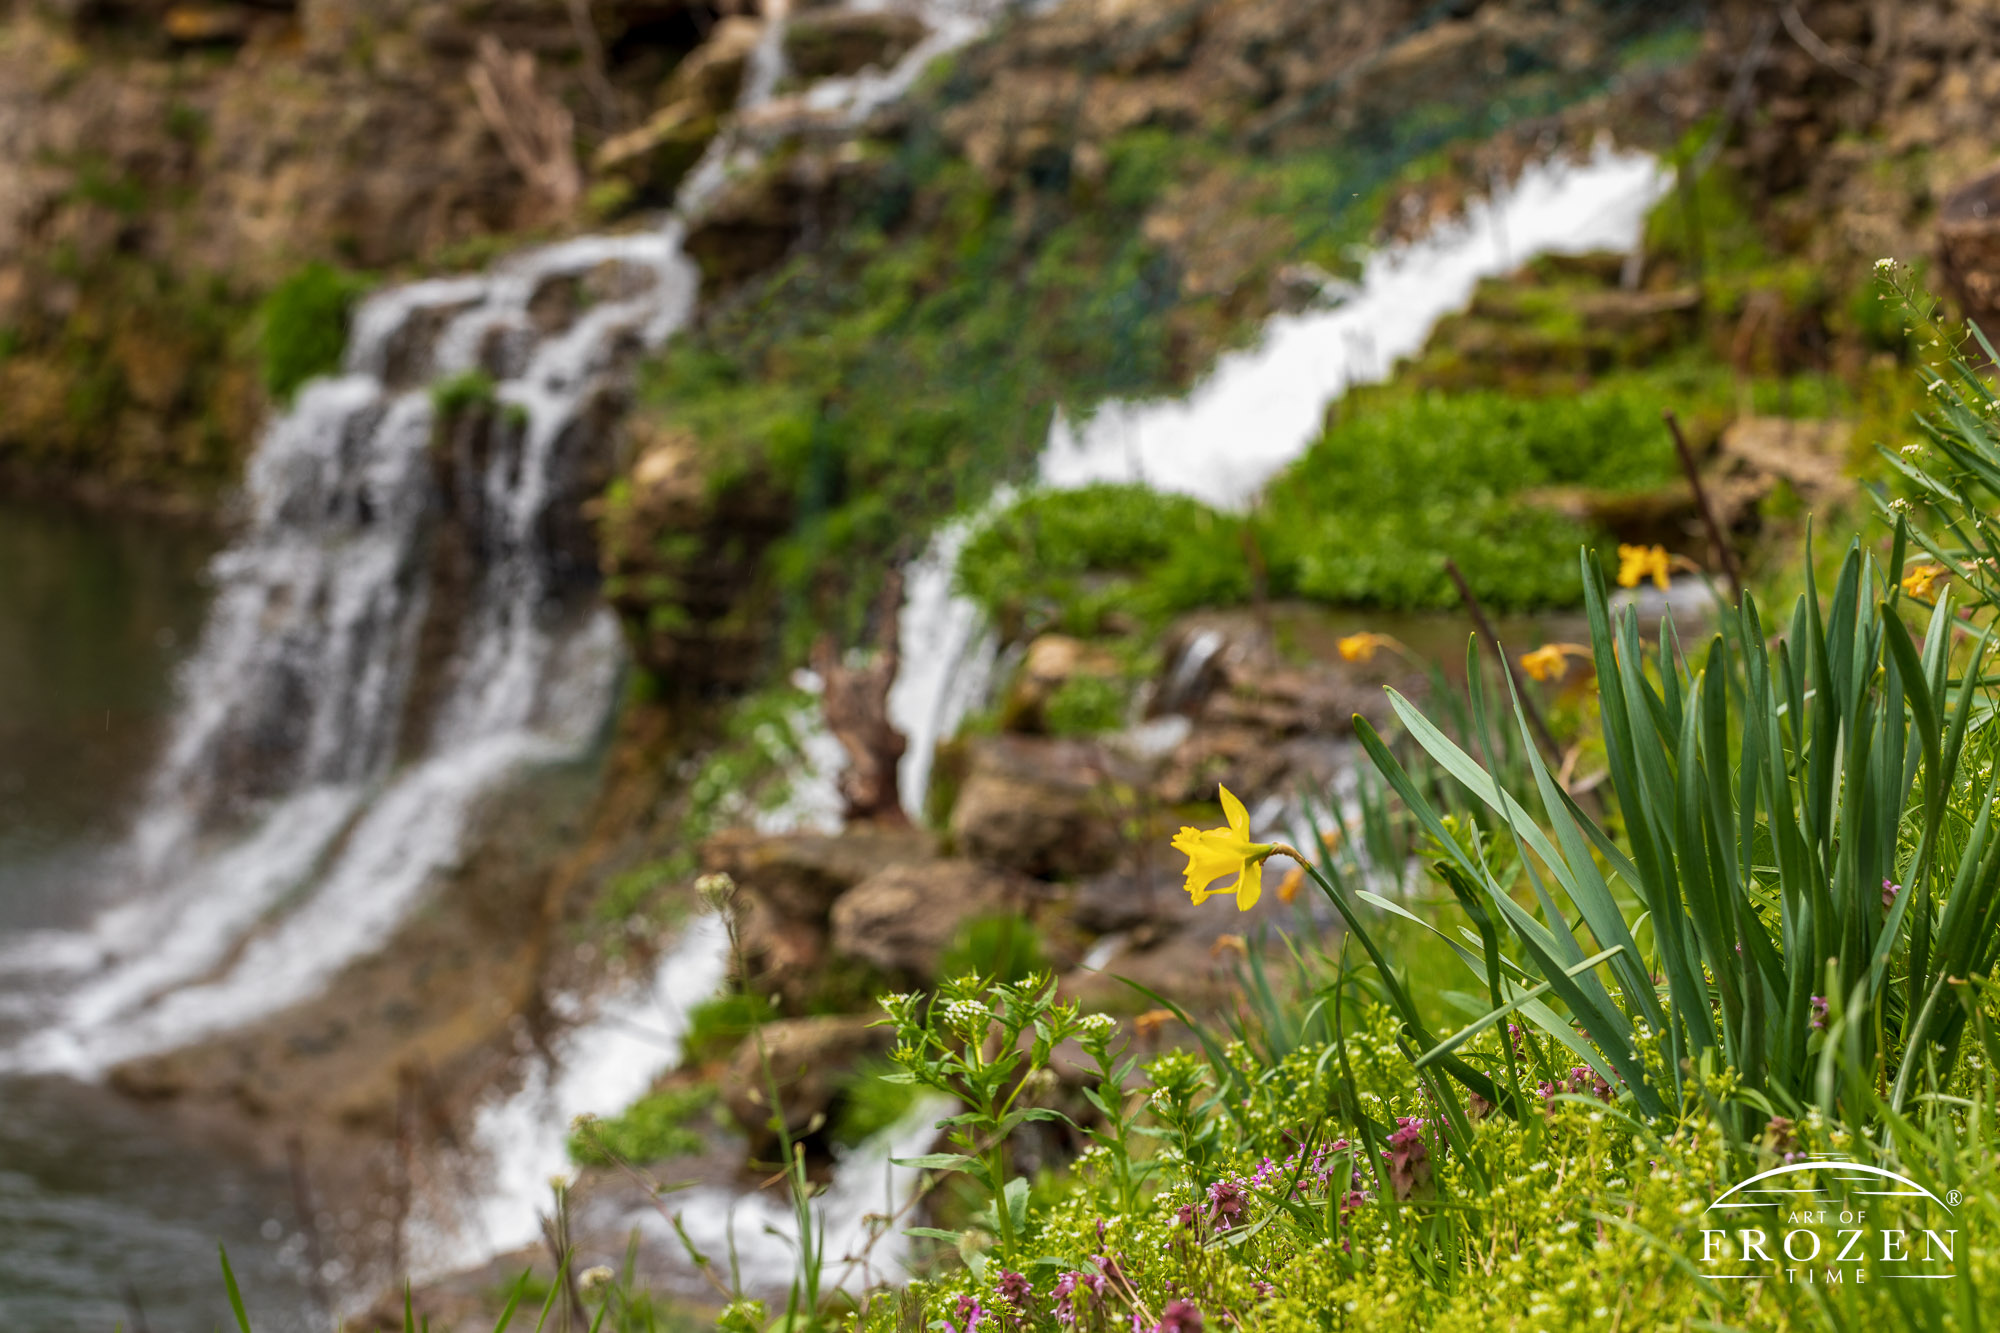 An intimate view of a blooming daffodil as it clings to rocks near Clifton Mill